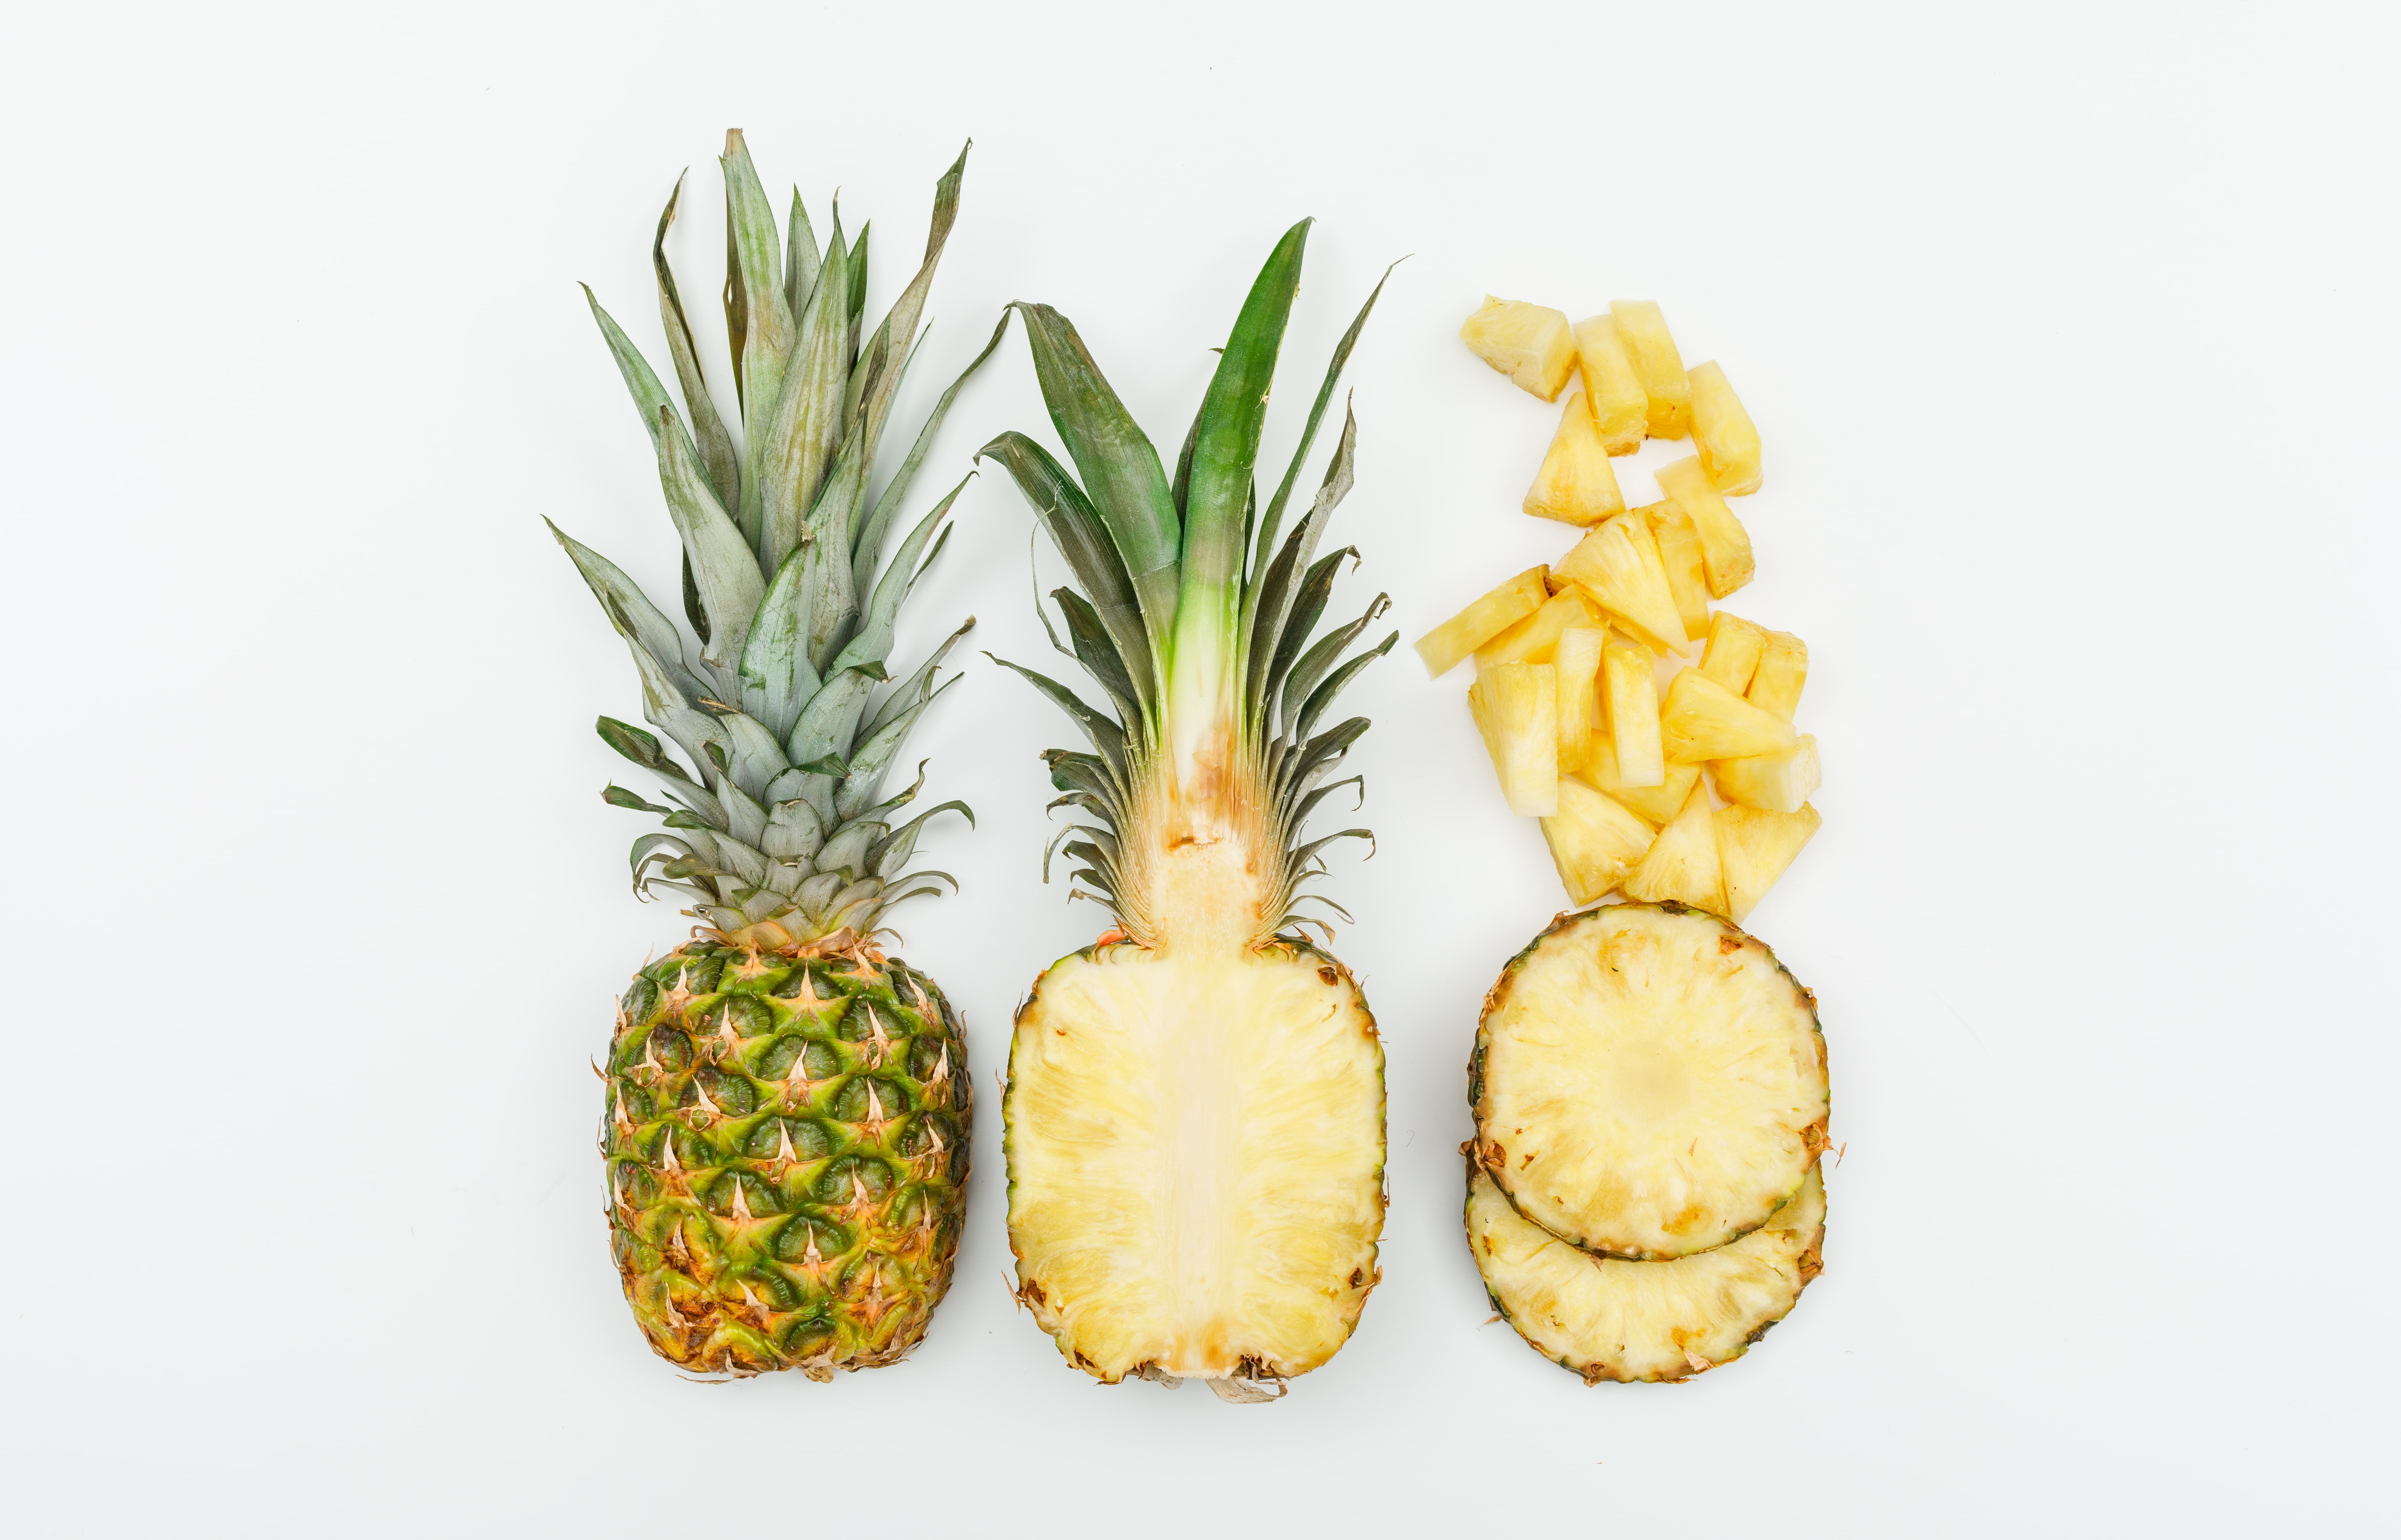 pineapple-whole-half-slices-top-view-white-min.jpg